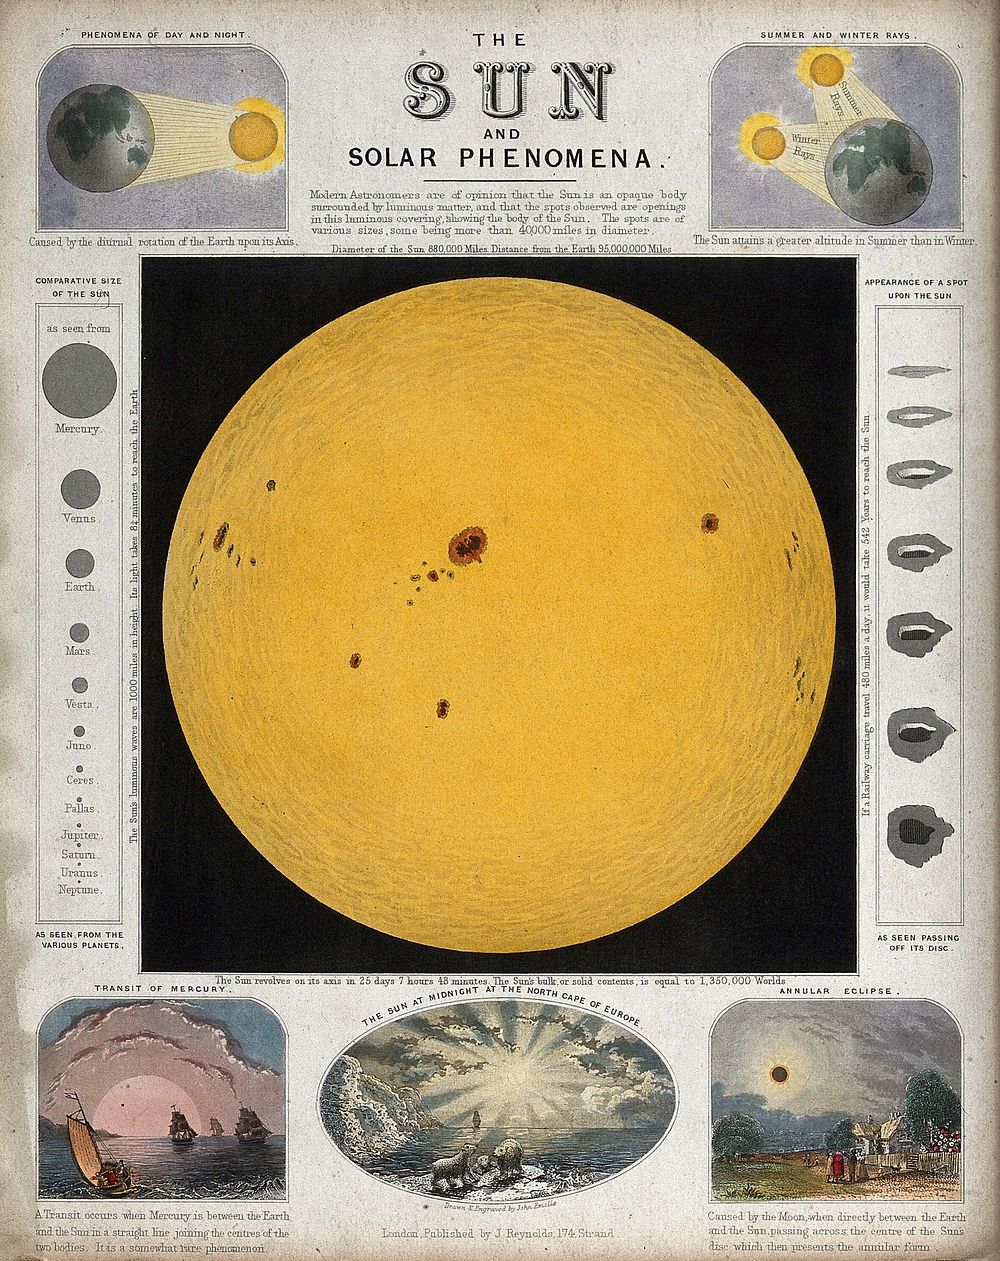 Astronomy: a diagram of the sun, and various effects of sunlight. Coloured engraving.